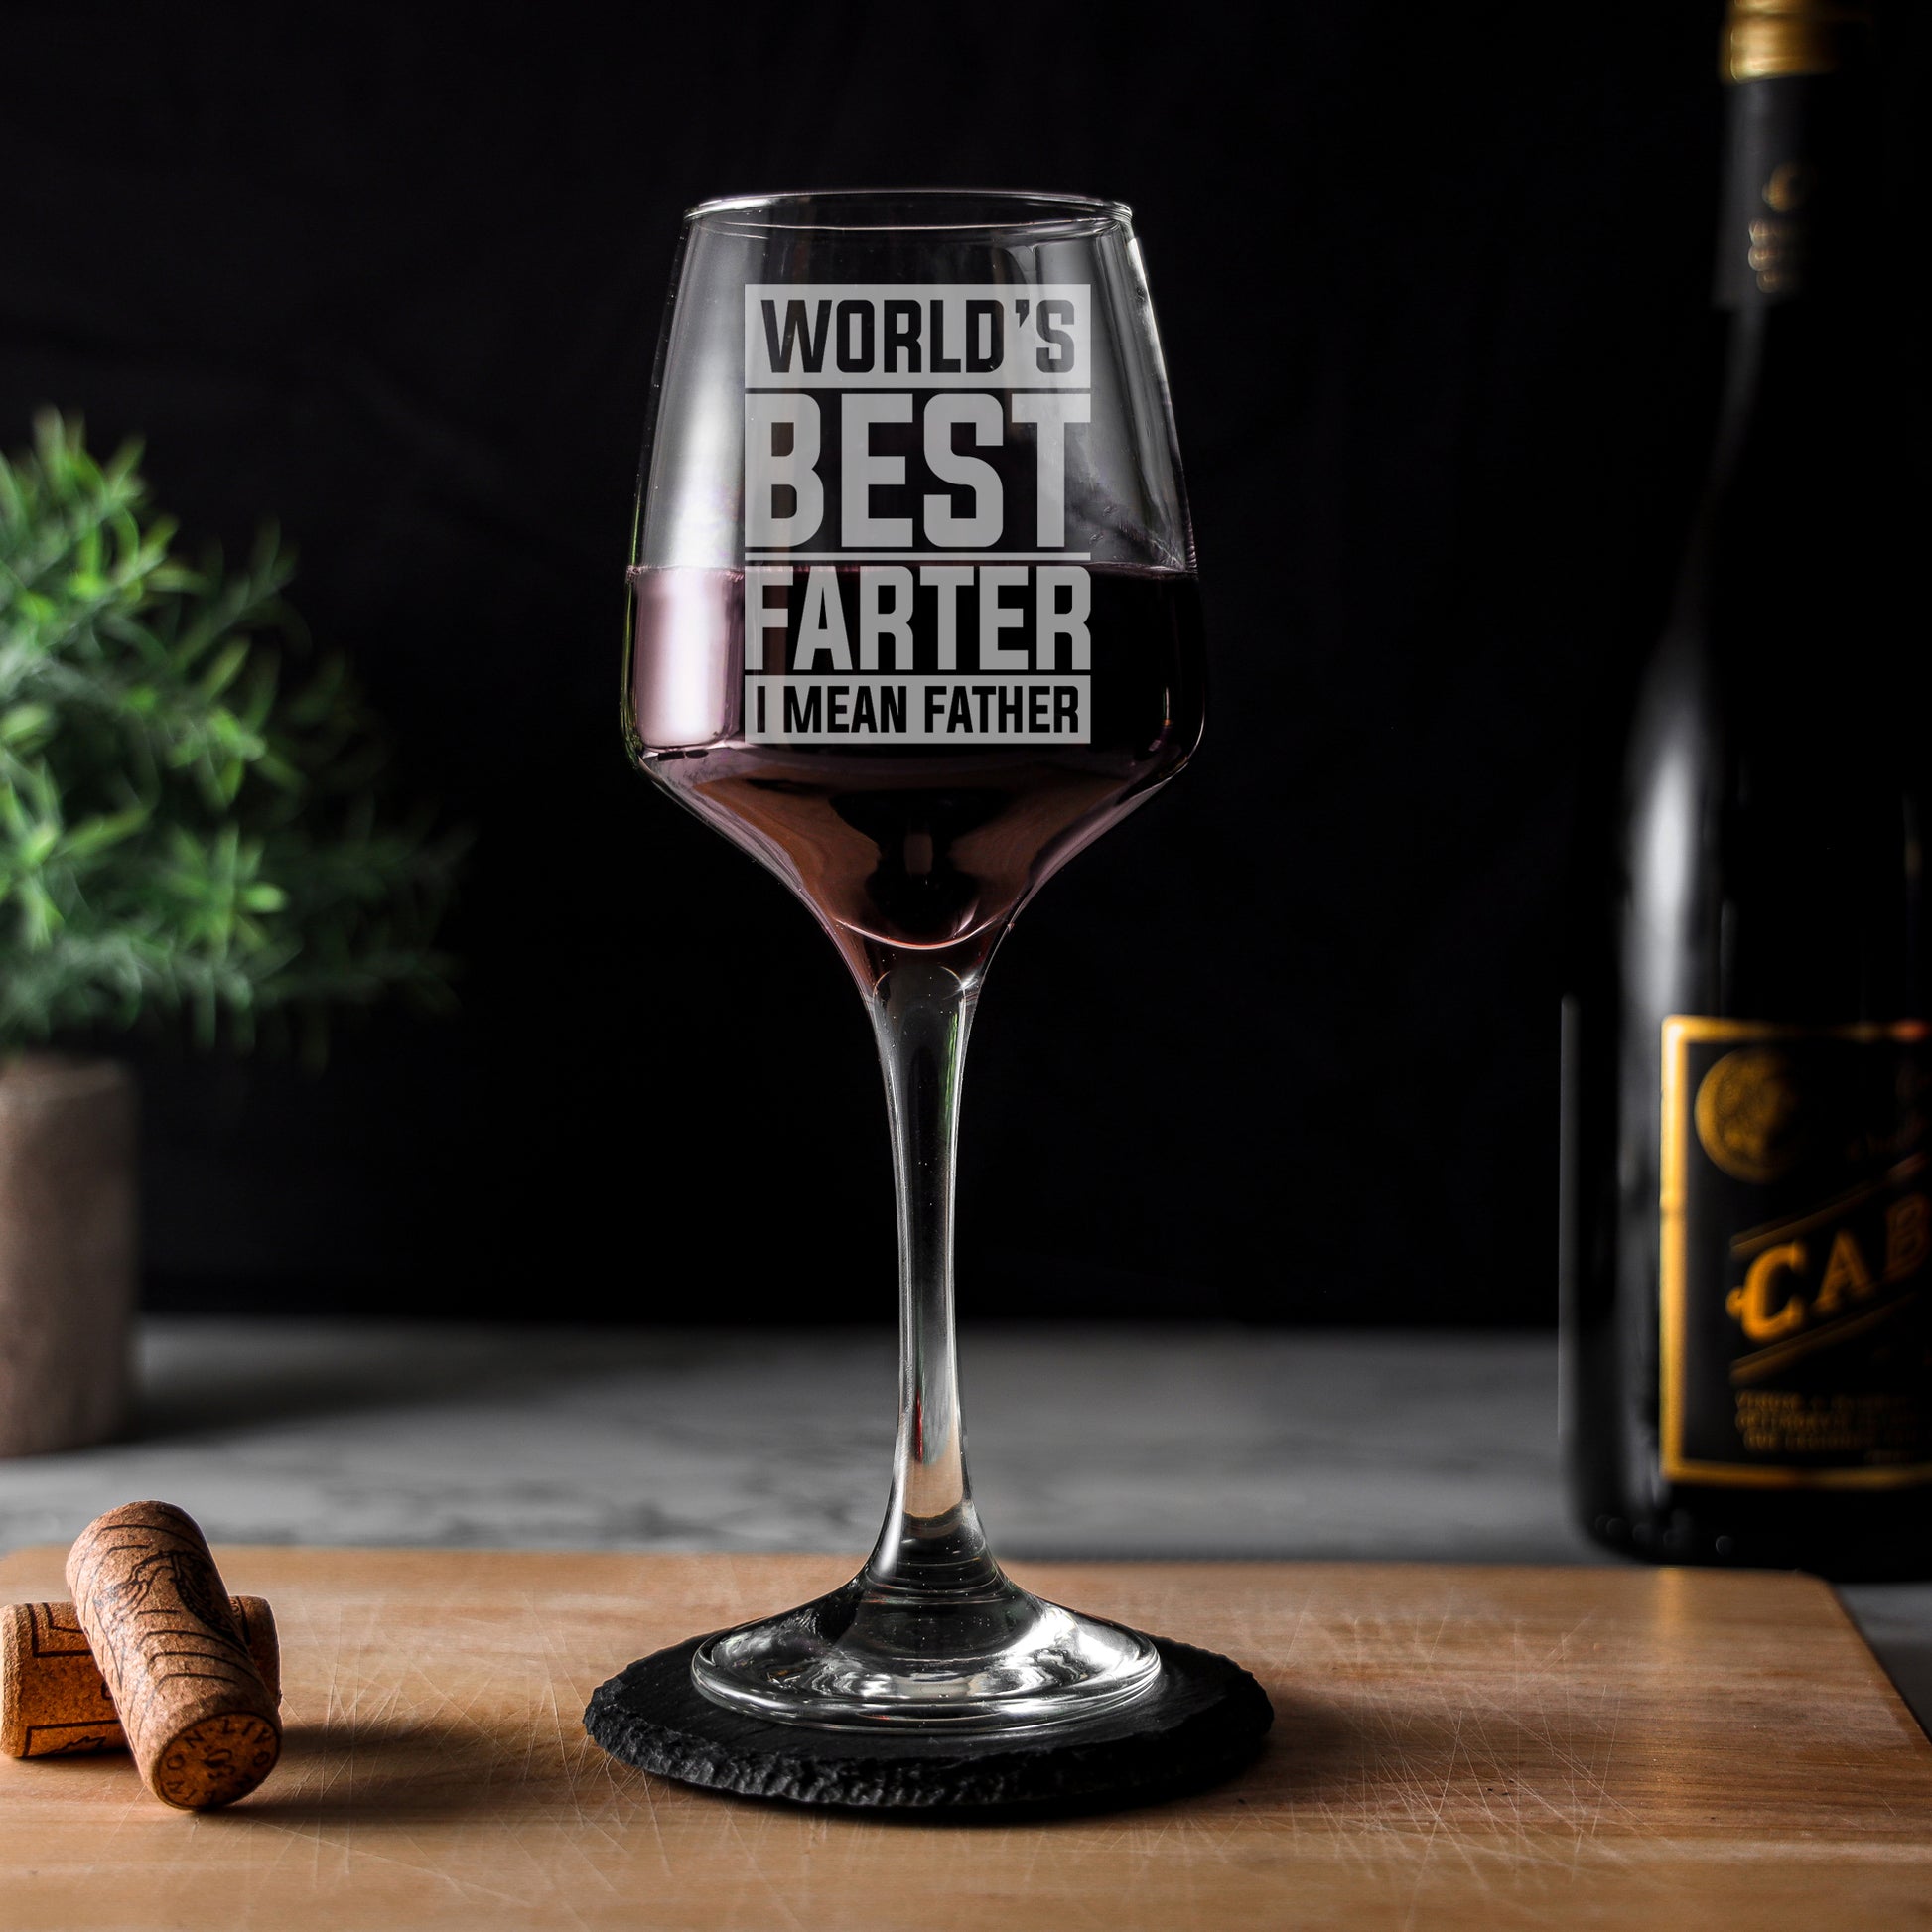 "Worlds Best Farter I Mean Father" Novelty Engraved Wine Glass and/or Coaster Set  - Always Looking Good - Glass Only Square Design 